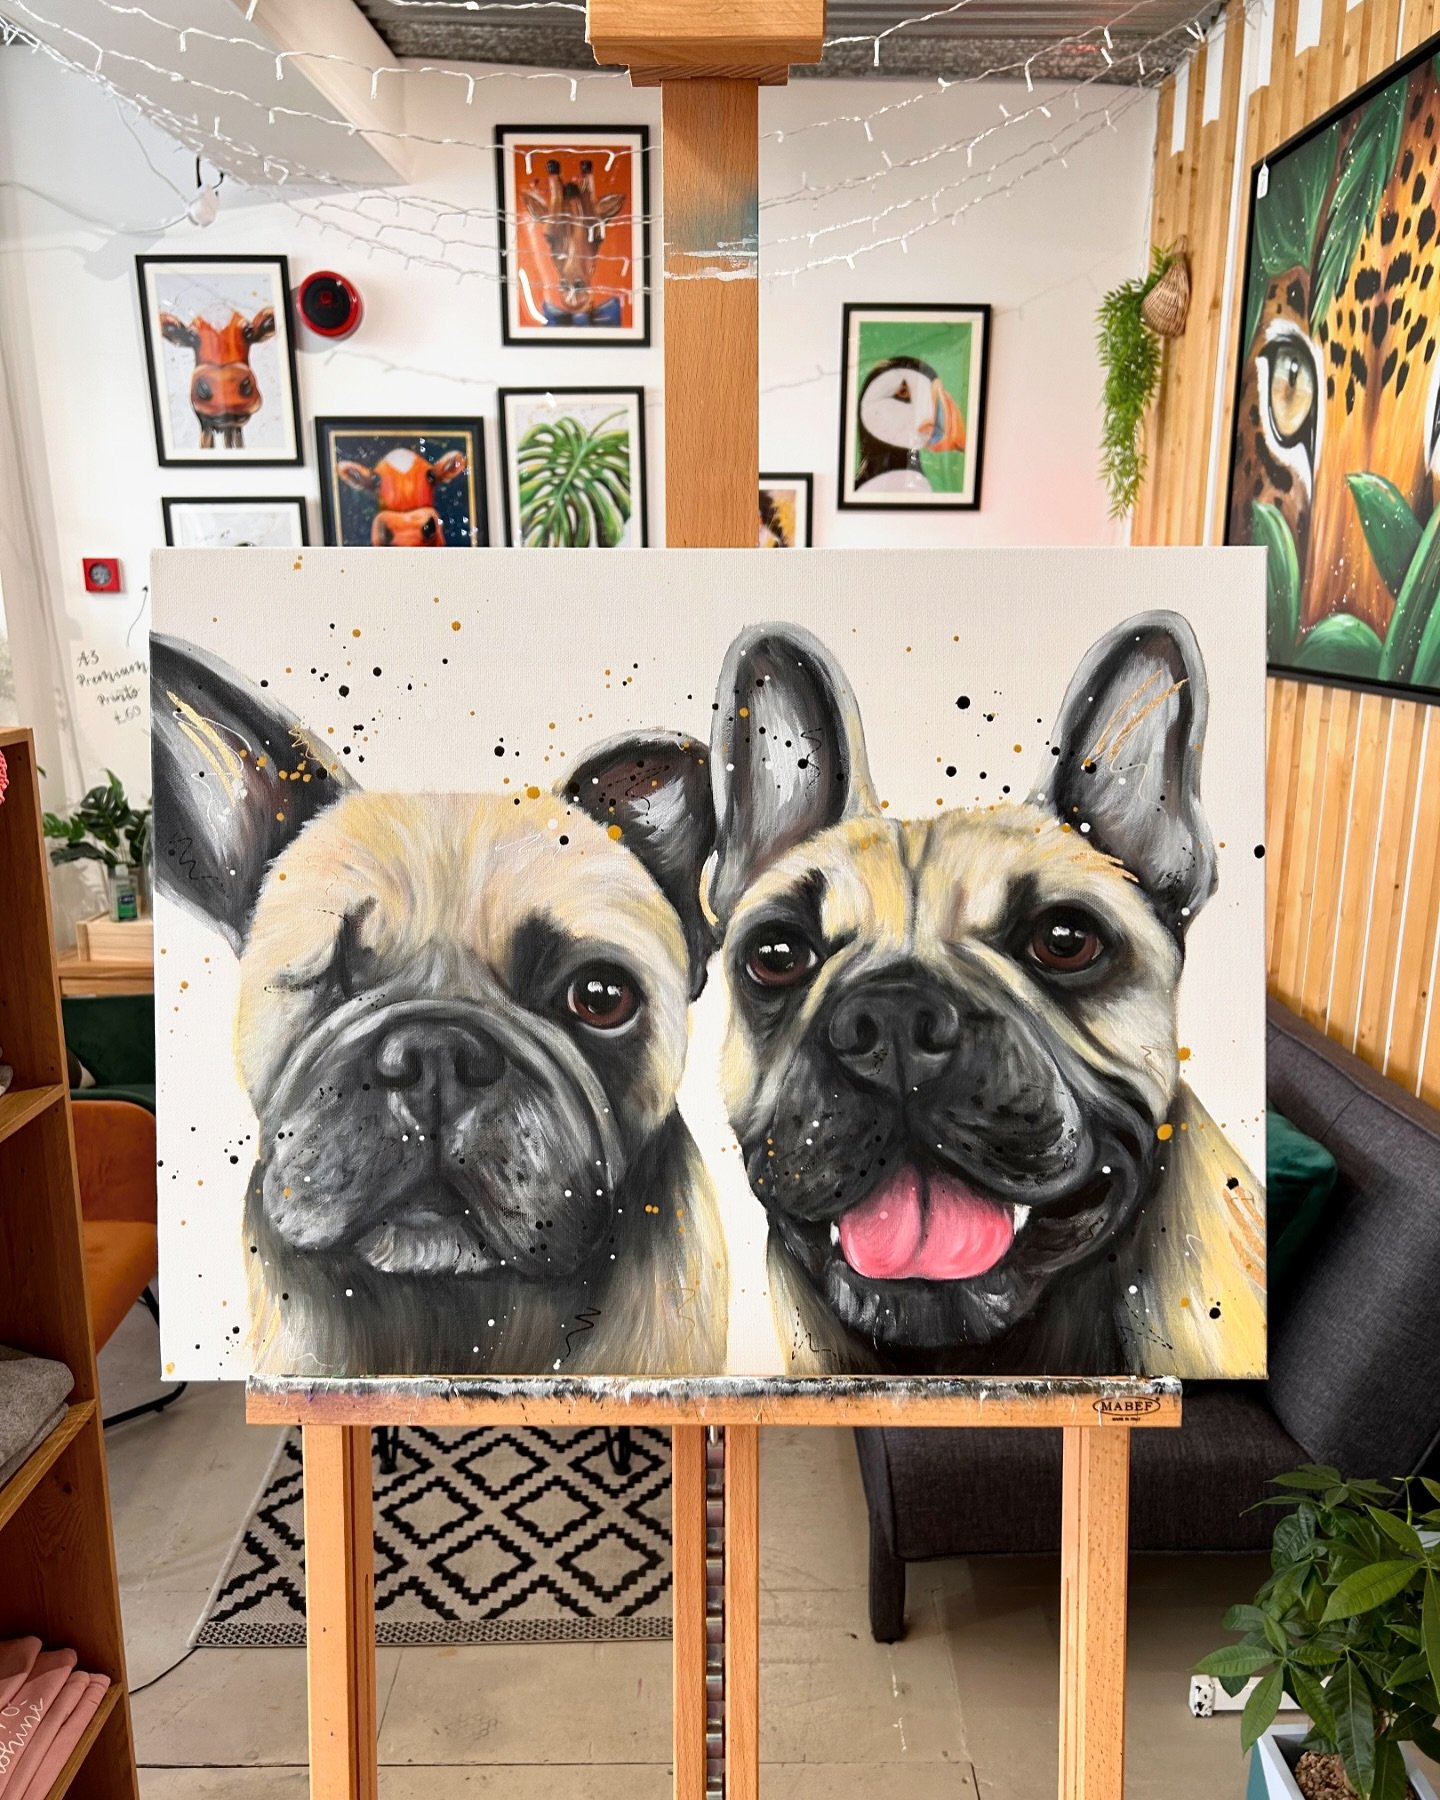 These Frenchies have made their way to Ireland 🇮🇪 

A Frenchie might be on the cards as No. 6 in my new series 🙊 keep your eyes peeled!